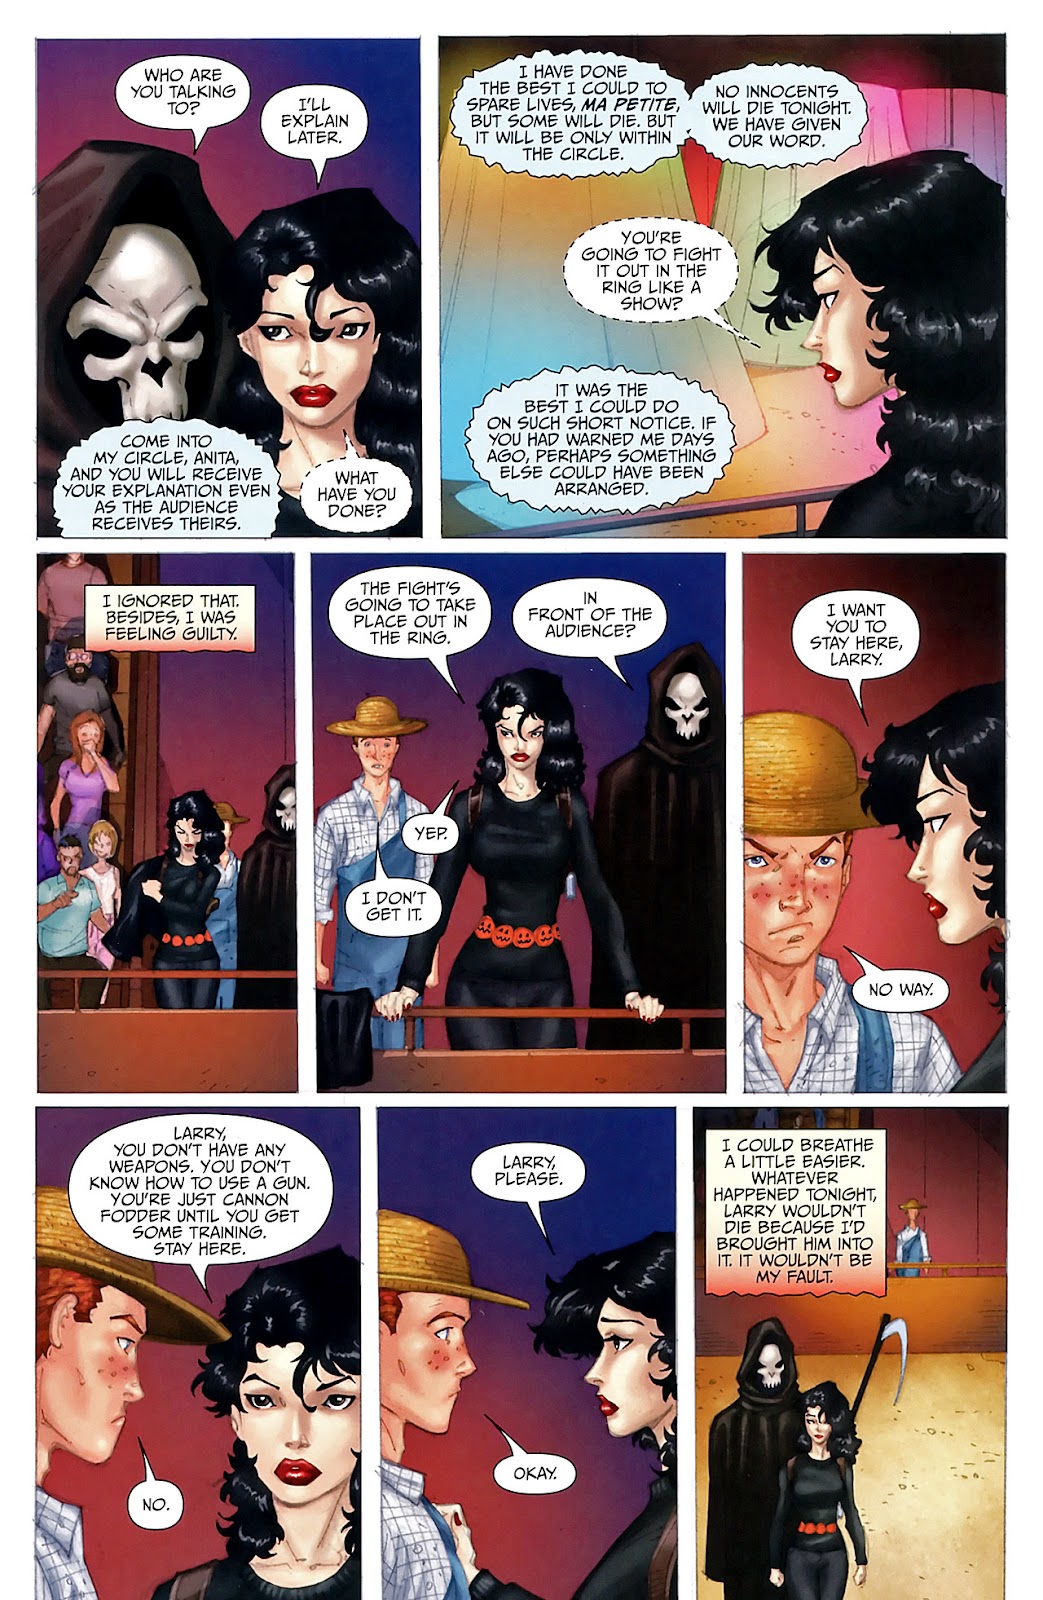 Anita Blake, Vampire Hunter: Circus of the Damned - The Scoundrel issue 4 - Page 11